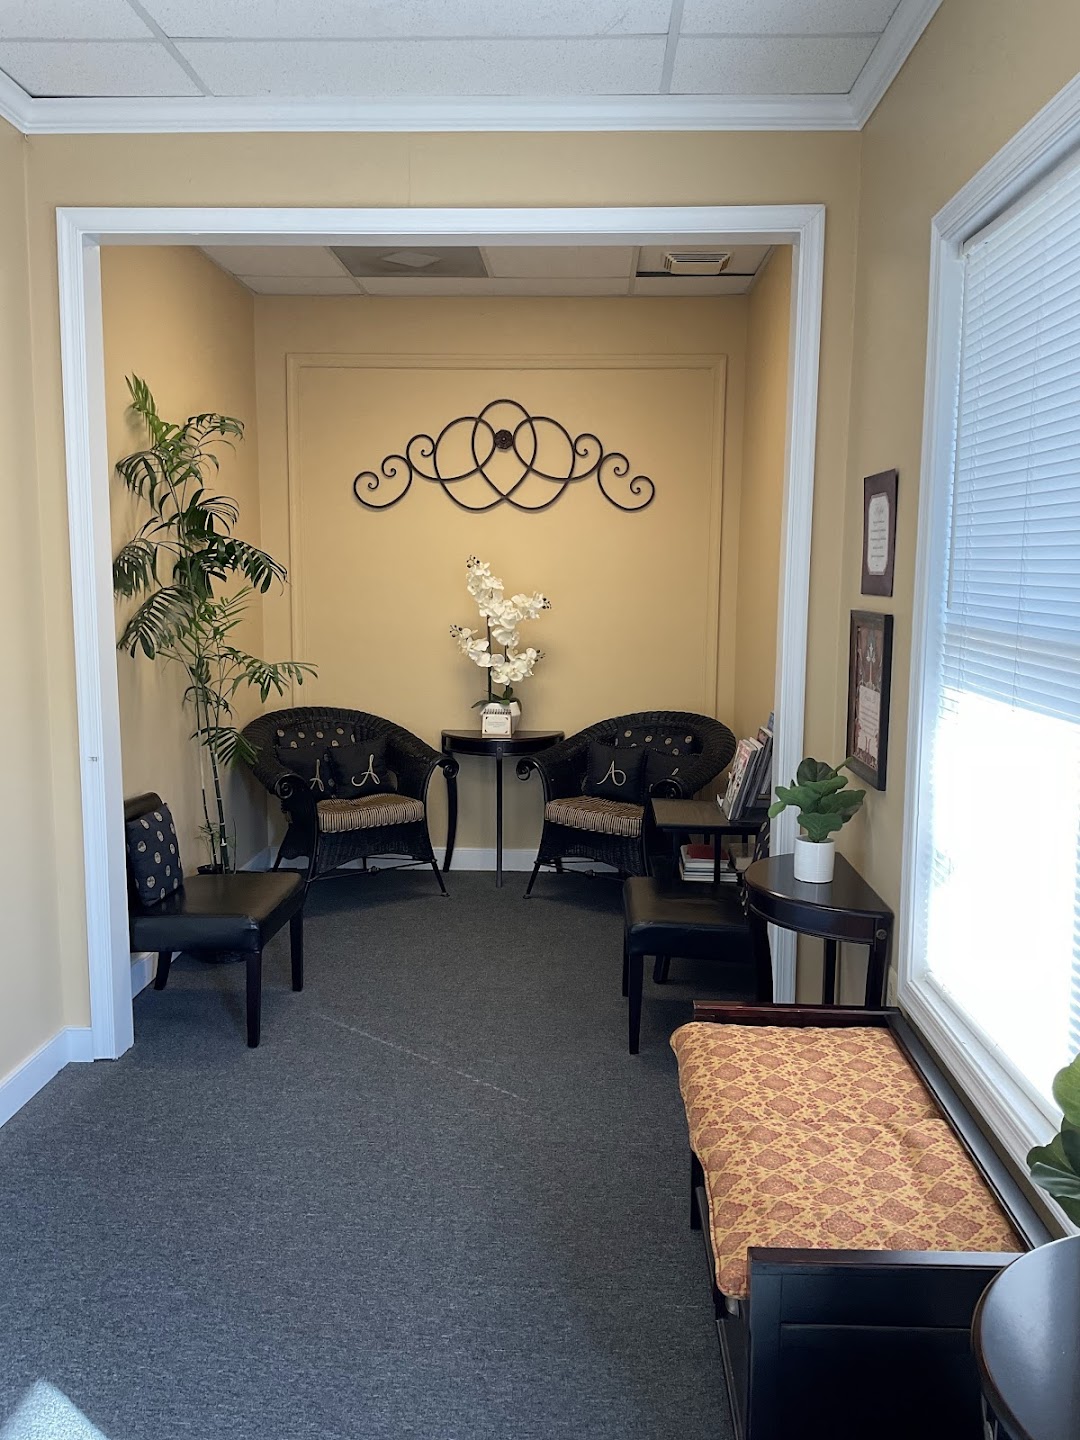 Dr. Syns Acupuncture Clinic